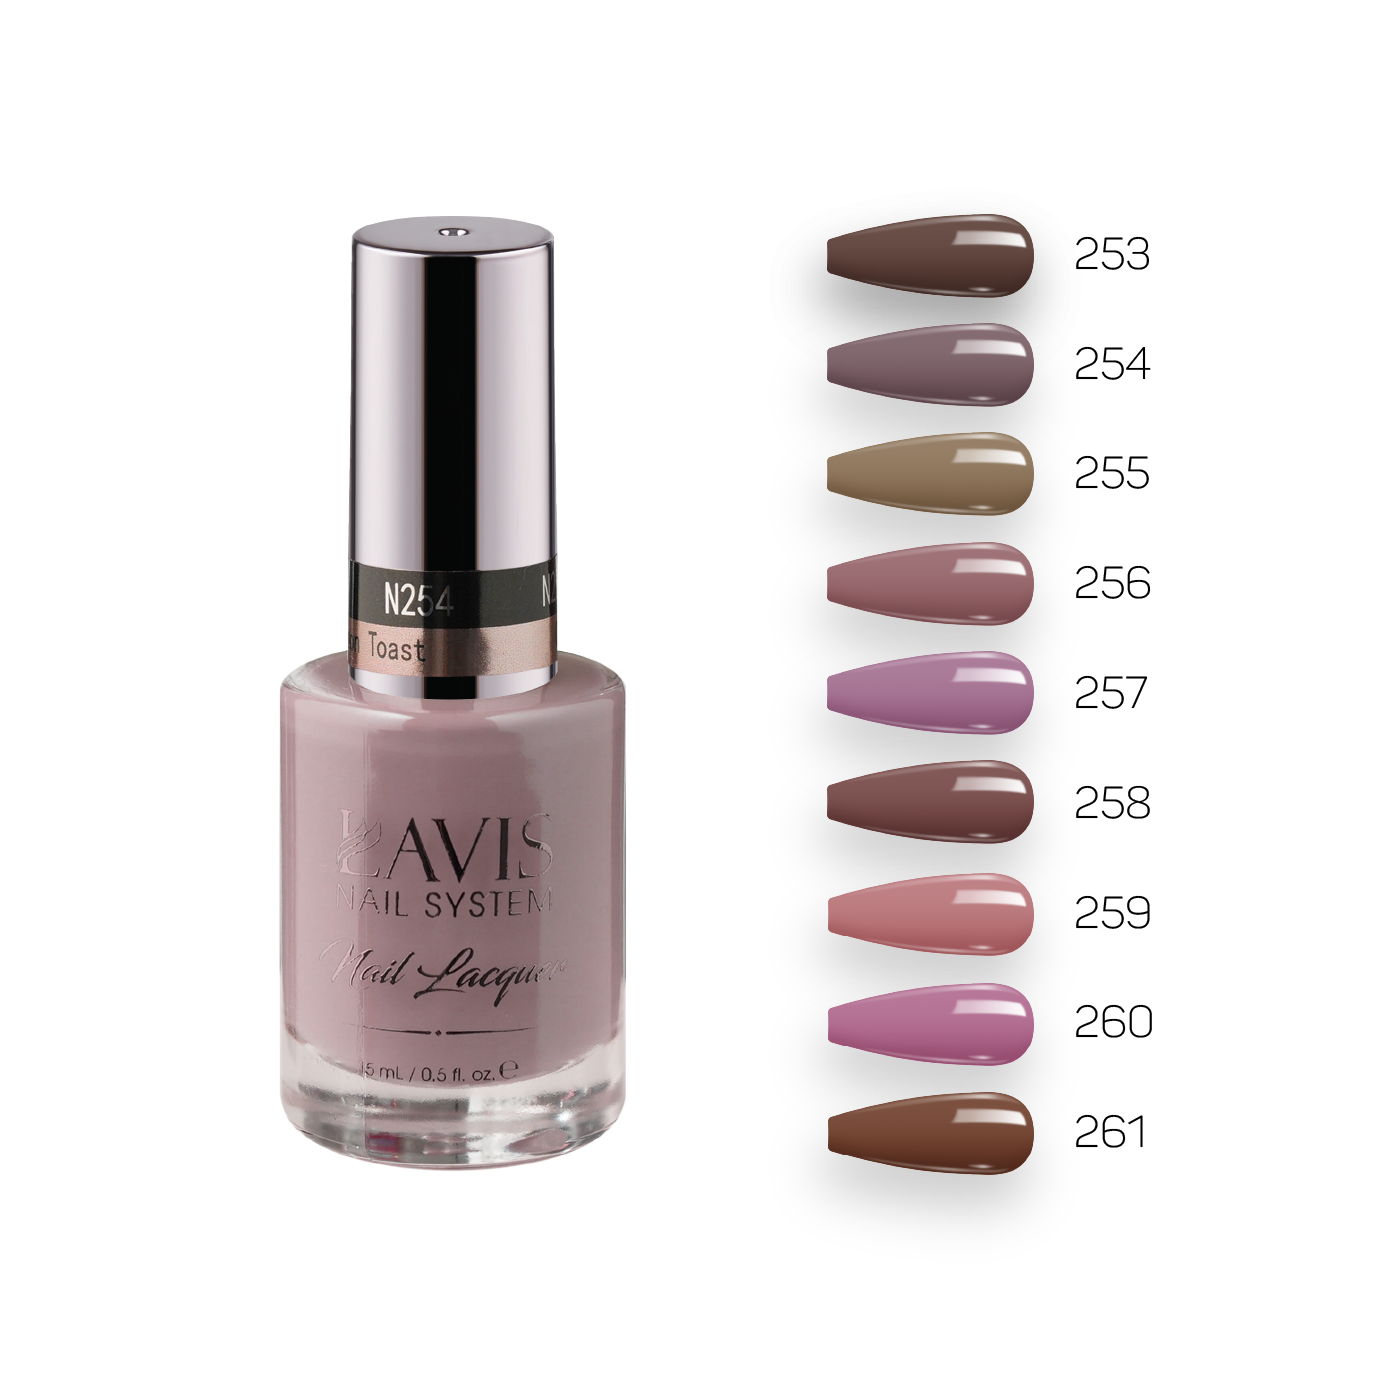  Lavis Healthy Nail Lacquer Fall Winter Set N3 (9 colors): 253, 254, 255, 256, 257, 258, 259, 260, 261